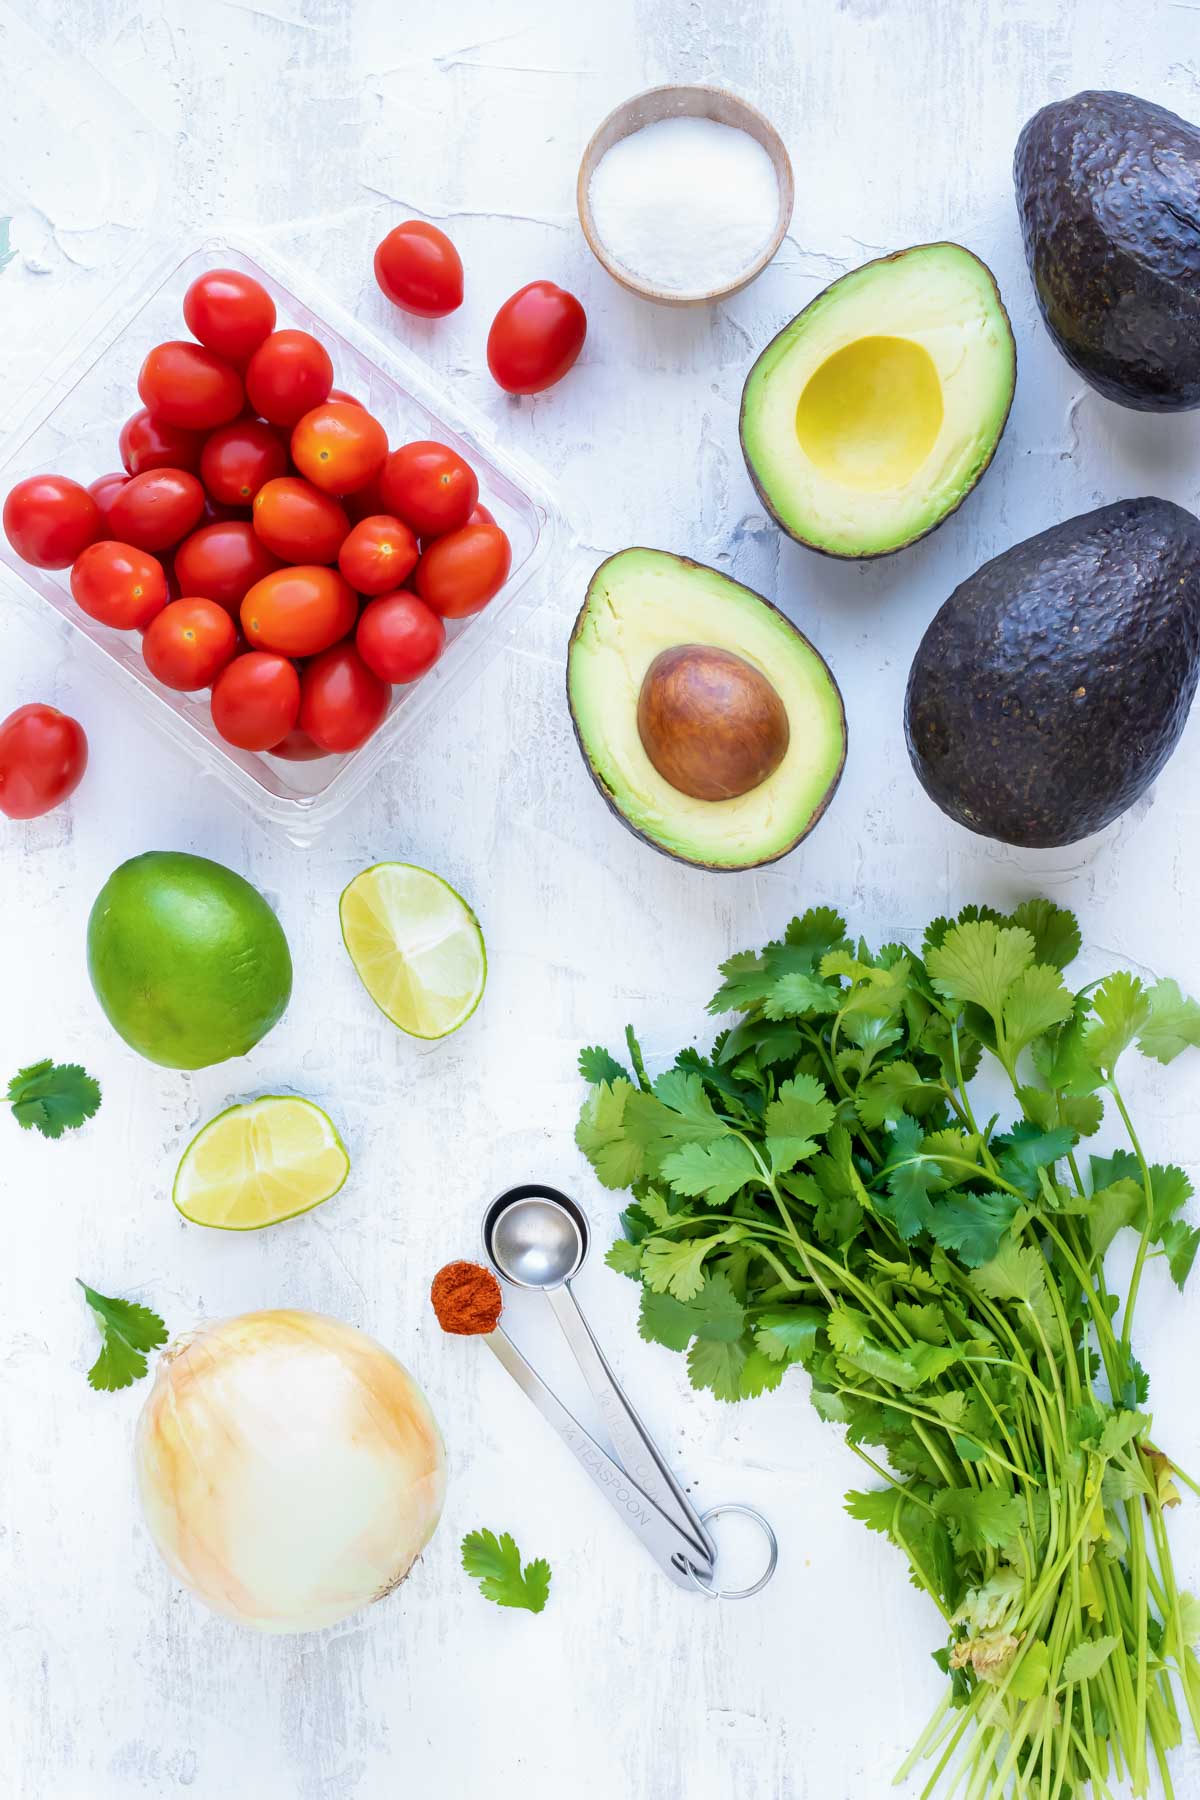 Avocados, tomatoes, onion, lime juice, and cilantro as guacamole ingredients.